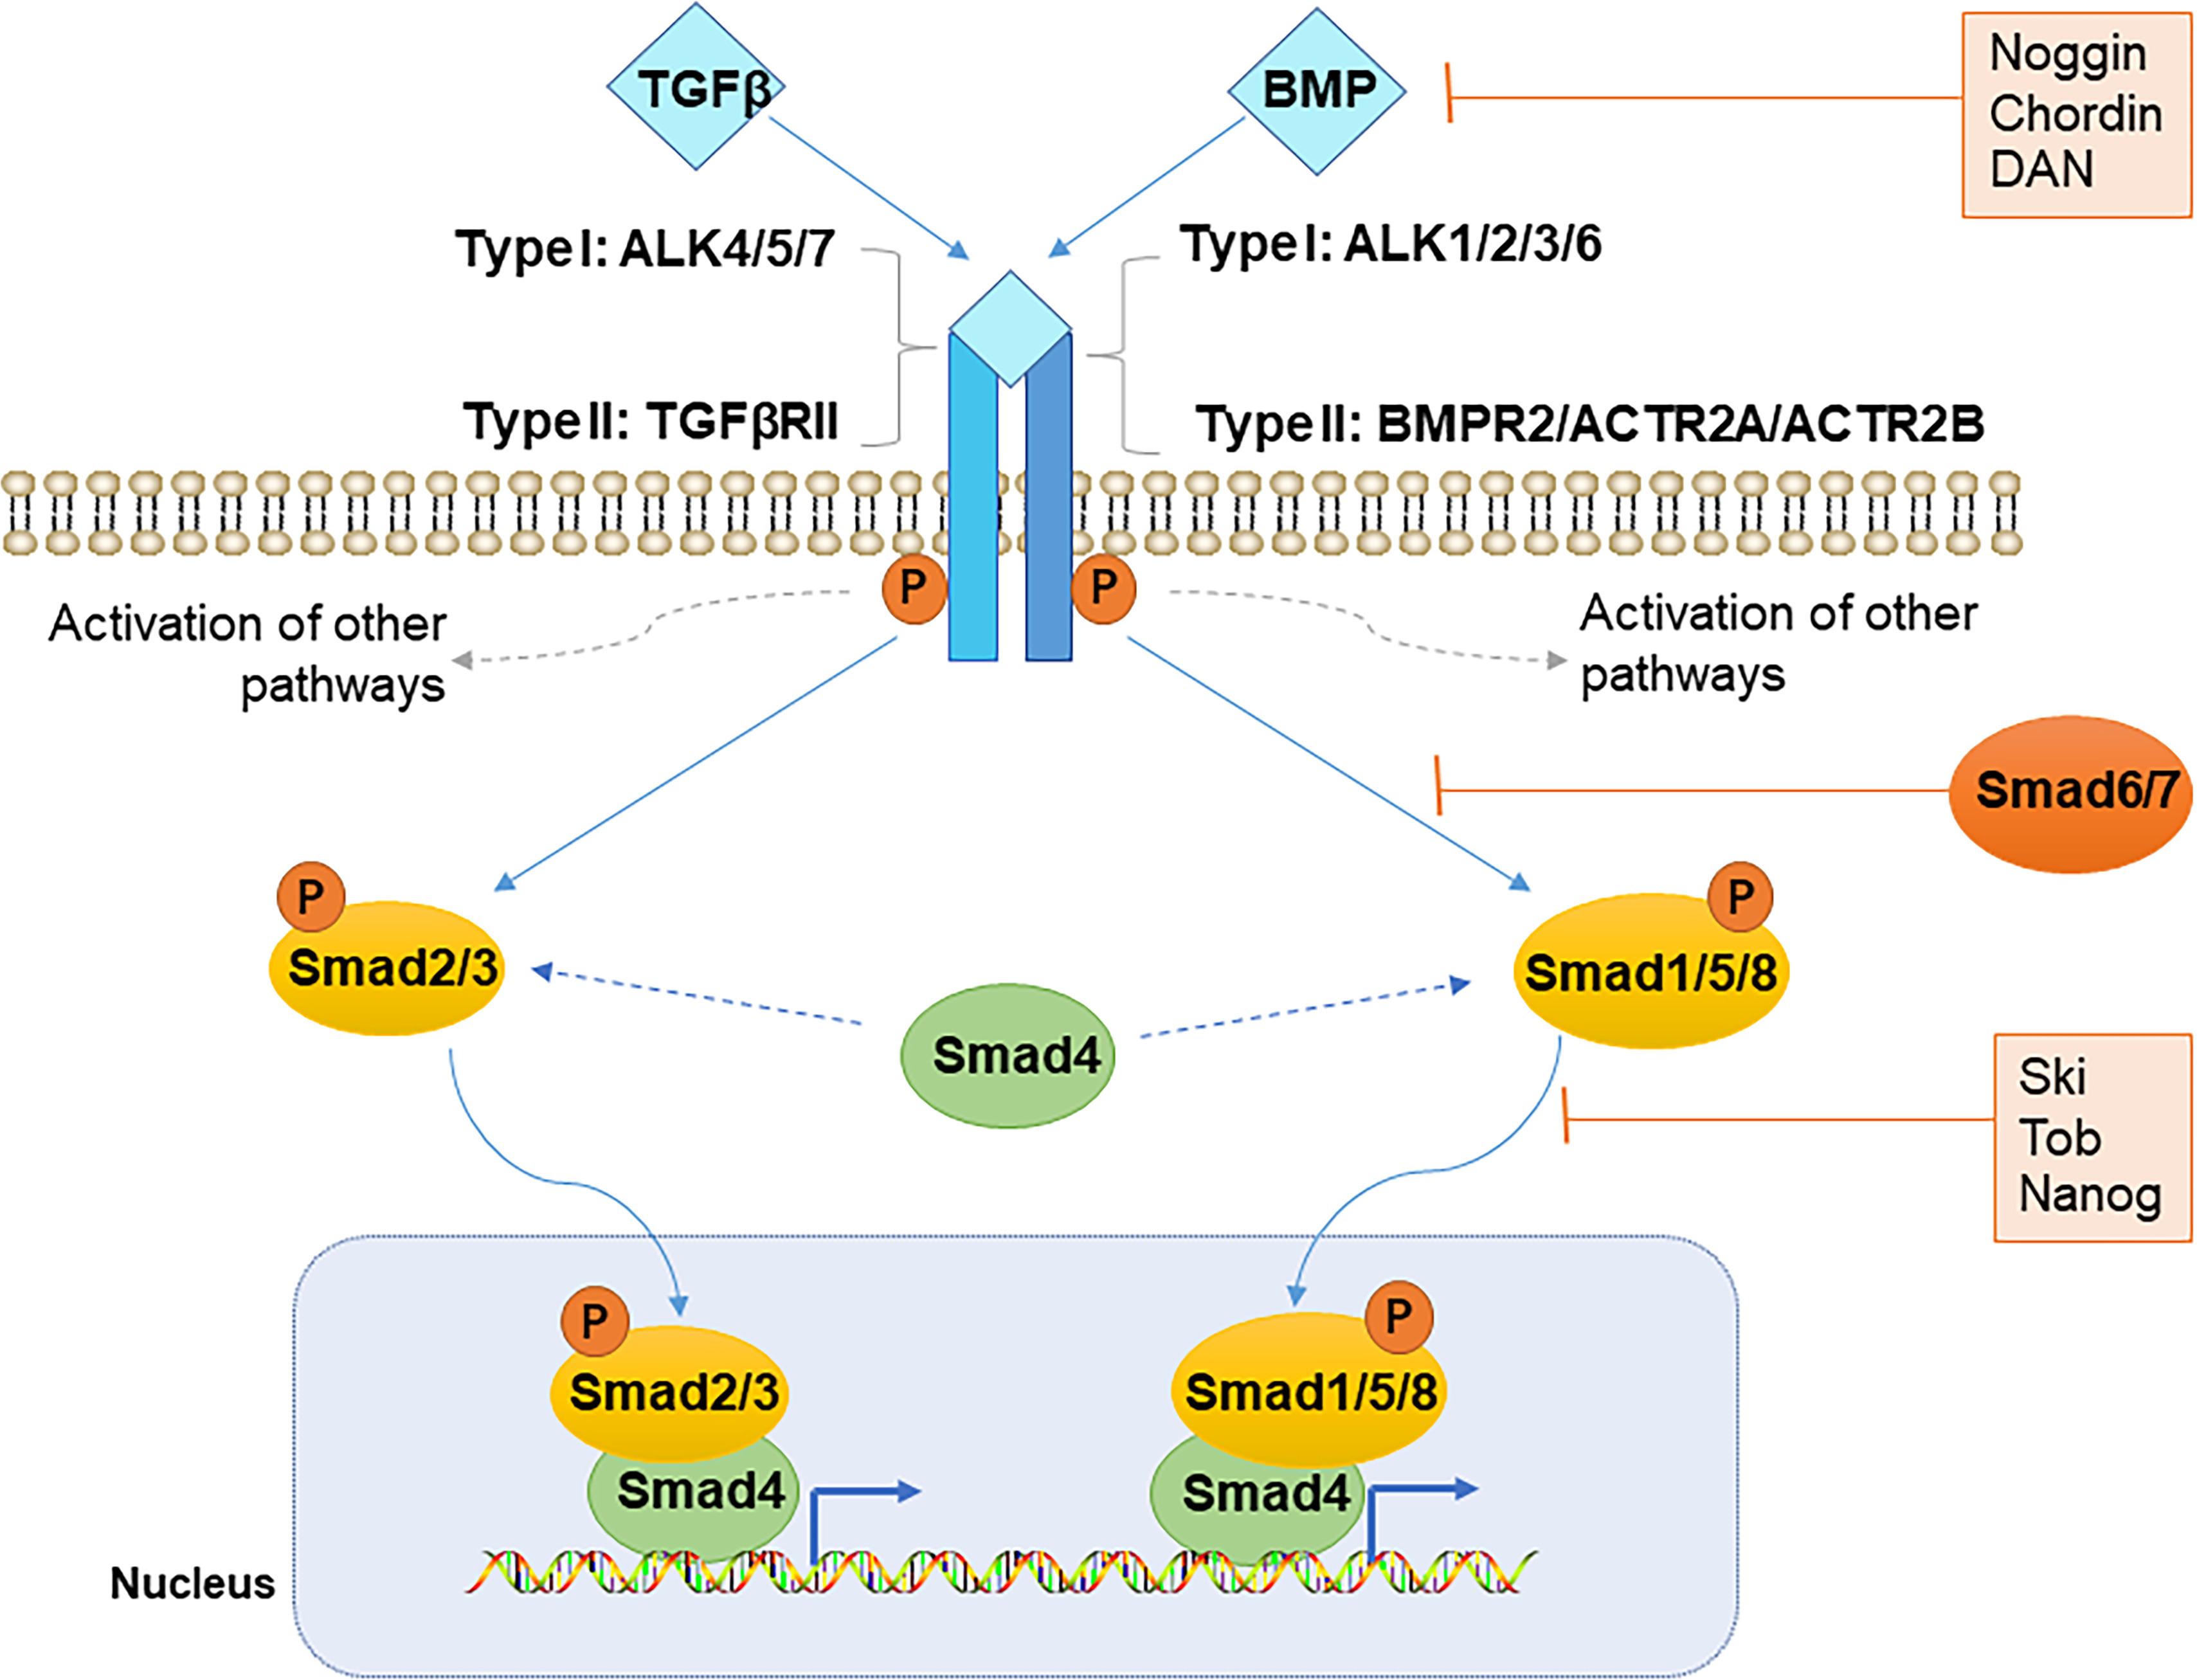 Fig. 1 
            Signalling by the bone morphogenetic protein (BMP) and transforming growth factor β (TGFβ) signalling. There are two Smad-based canonical pathways: Smad 2/3 for TGFβ ligands, and Smad 1/5/8 for BMPs. In the Smad-dependent signalling pathway, TGFβ/BMP binds to the receptor complex on the cell surface, which phosphorylates Smad2/3 and Smad1/5/8, respectively. Activated R-Smads form a complex with Smad4, and then transport into the nucleus to regulate gene transcription. Receptors can also activate other signalling pathways. In addition, BMP signalling pathway can be tempered by extracellular BMP antagonists (noggin, chordin, and differential screening-selected gene aberrative in neuroblastoma (DAN)), inhibitors of R-Smads phosphorylation (Smad6/7) and intracellular Smad-binding proteins (Ski, Tob, and Nanog). ACTR2A, activin receptor 2 A; ACTR2B, activin receptor 2B; ALK, activin-like kinase; TGFβRII, transforming growth factor β receptor type II; BMPR2, bone morphogenetic protein receptor type 2.
          